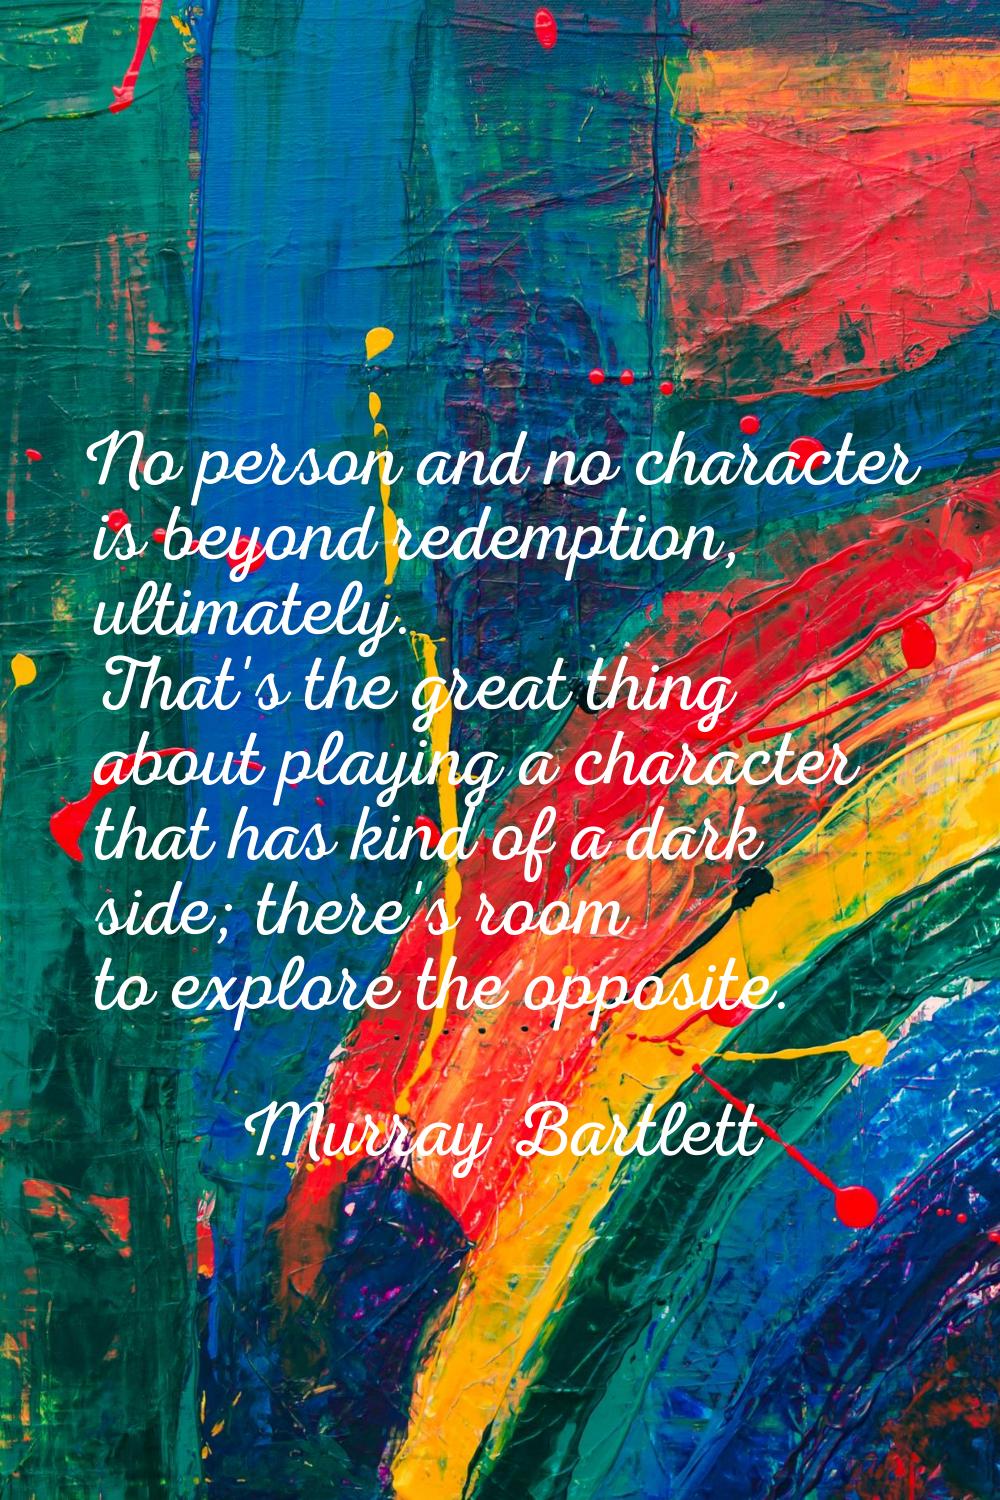 No person and no character is beyond redemption, ultimately. That's the great thing about playing a